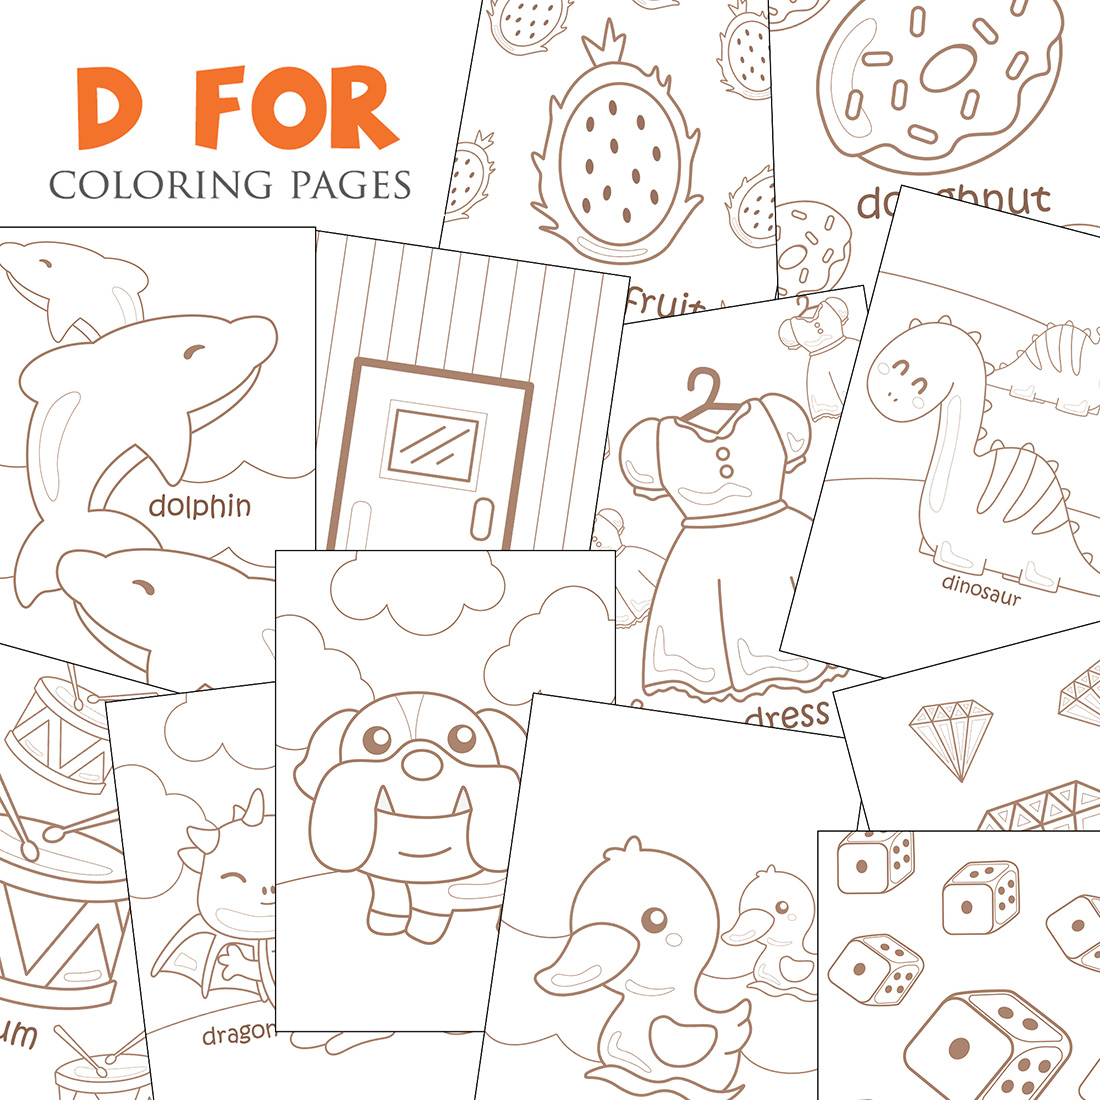 Alphabet D For Vocabulary School Letter Reading Writing Font Study Learning Student Toodler Kids Dolphin Dragon Fruit Dinosaur Drum Diamond Dress Duck Dice Doughnut Dog Door Cartoon Coloring Pages for Kids and Adult cover image.